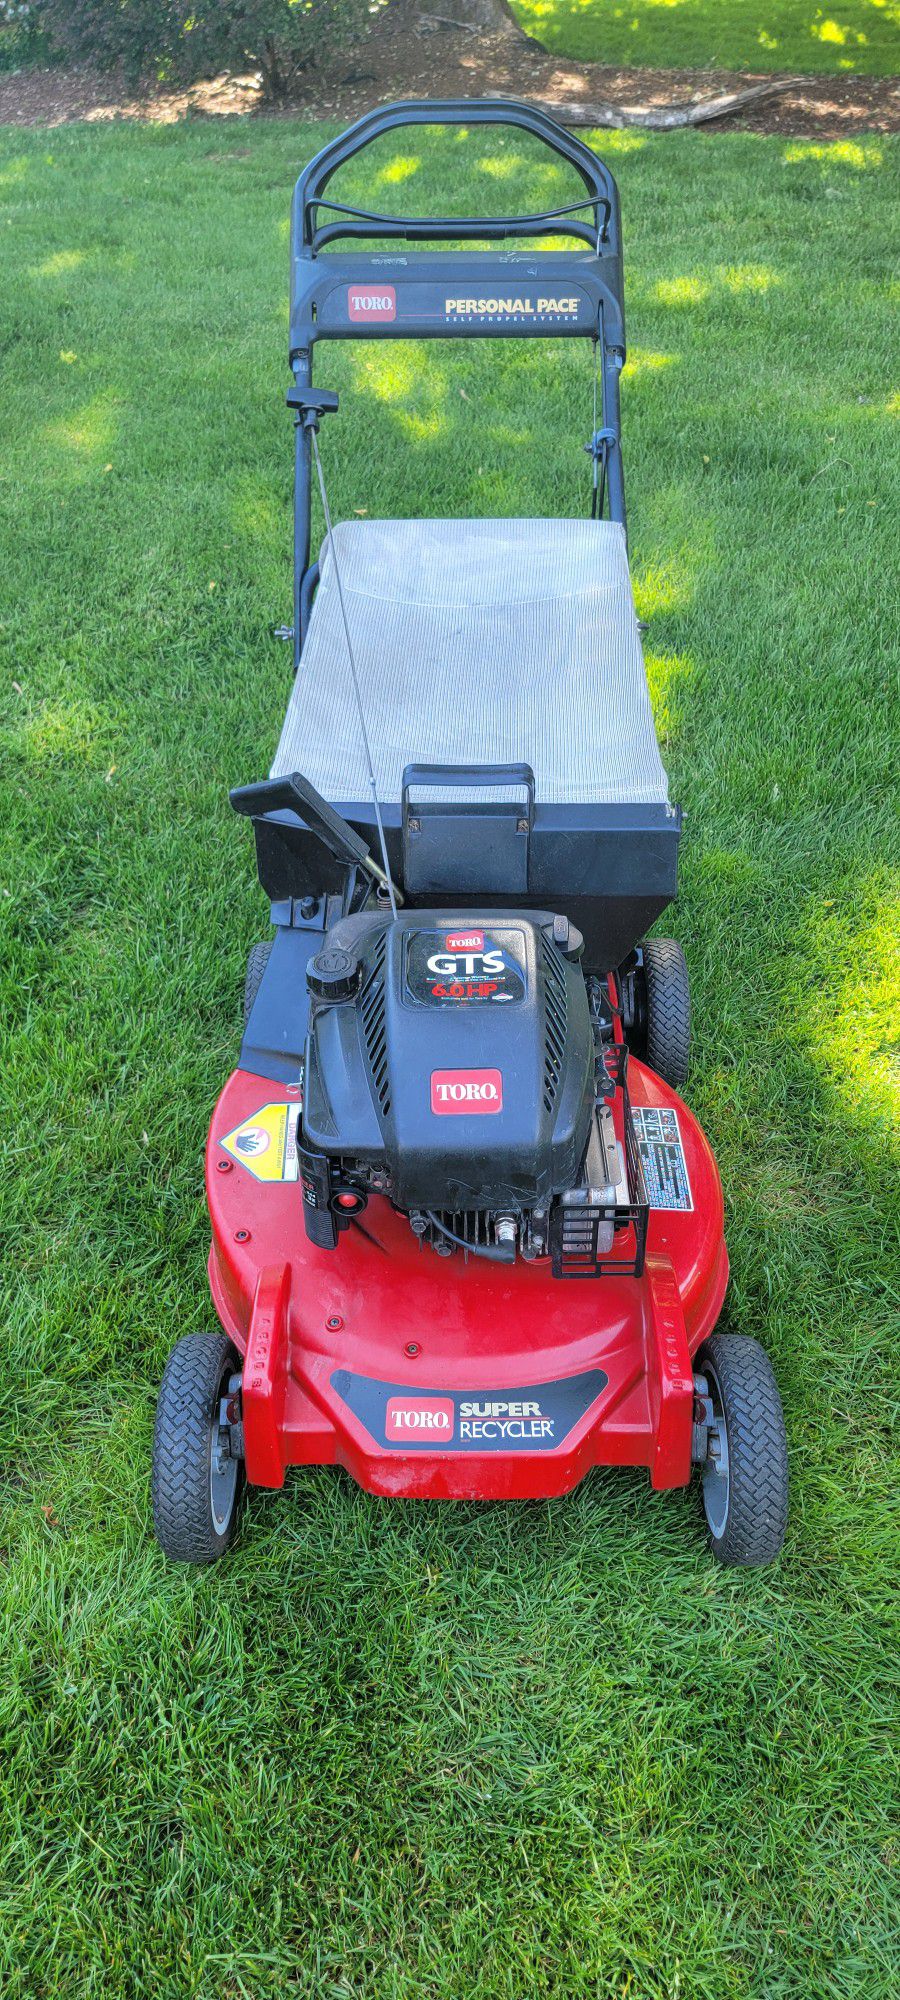 Self Propelled Toro Lawn Mower With Bag Runs Great 